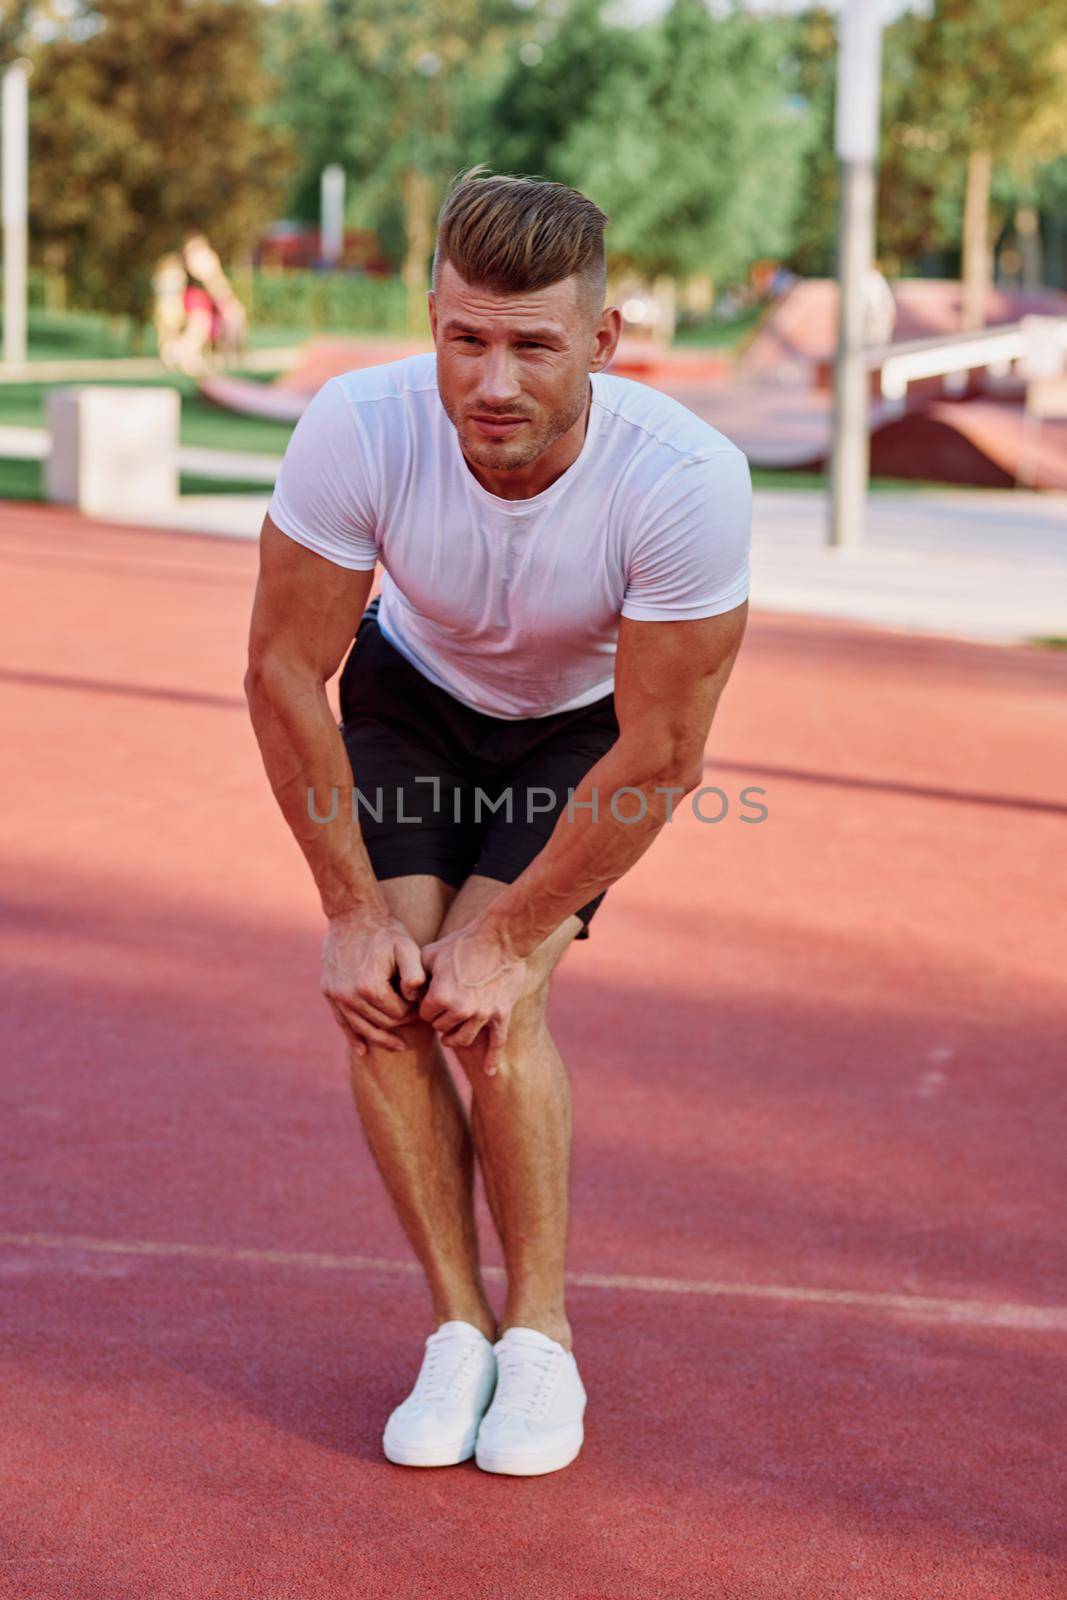 man in white t-shirt on the sports ground workout motivation. High quality photo